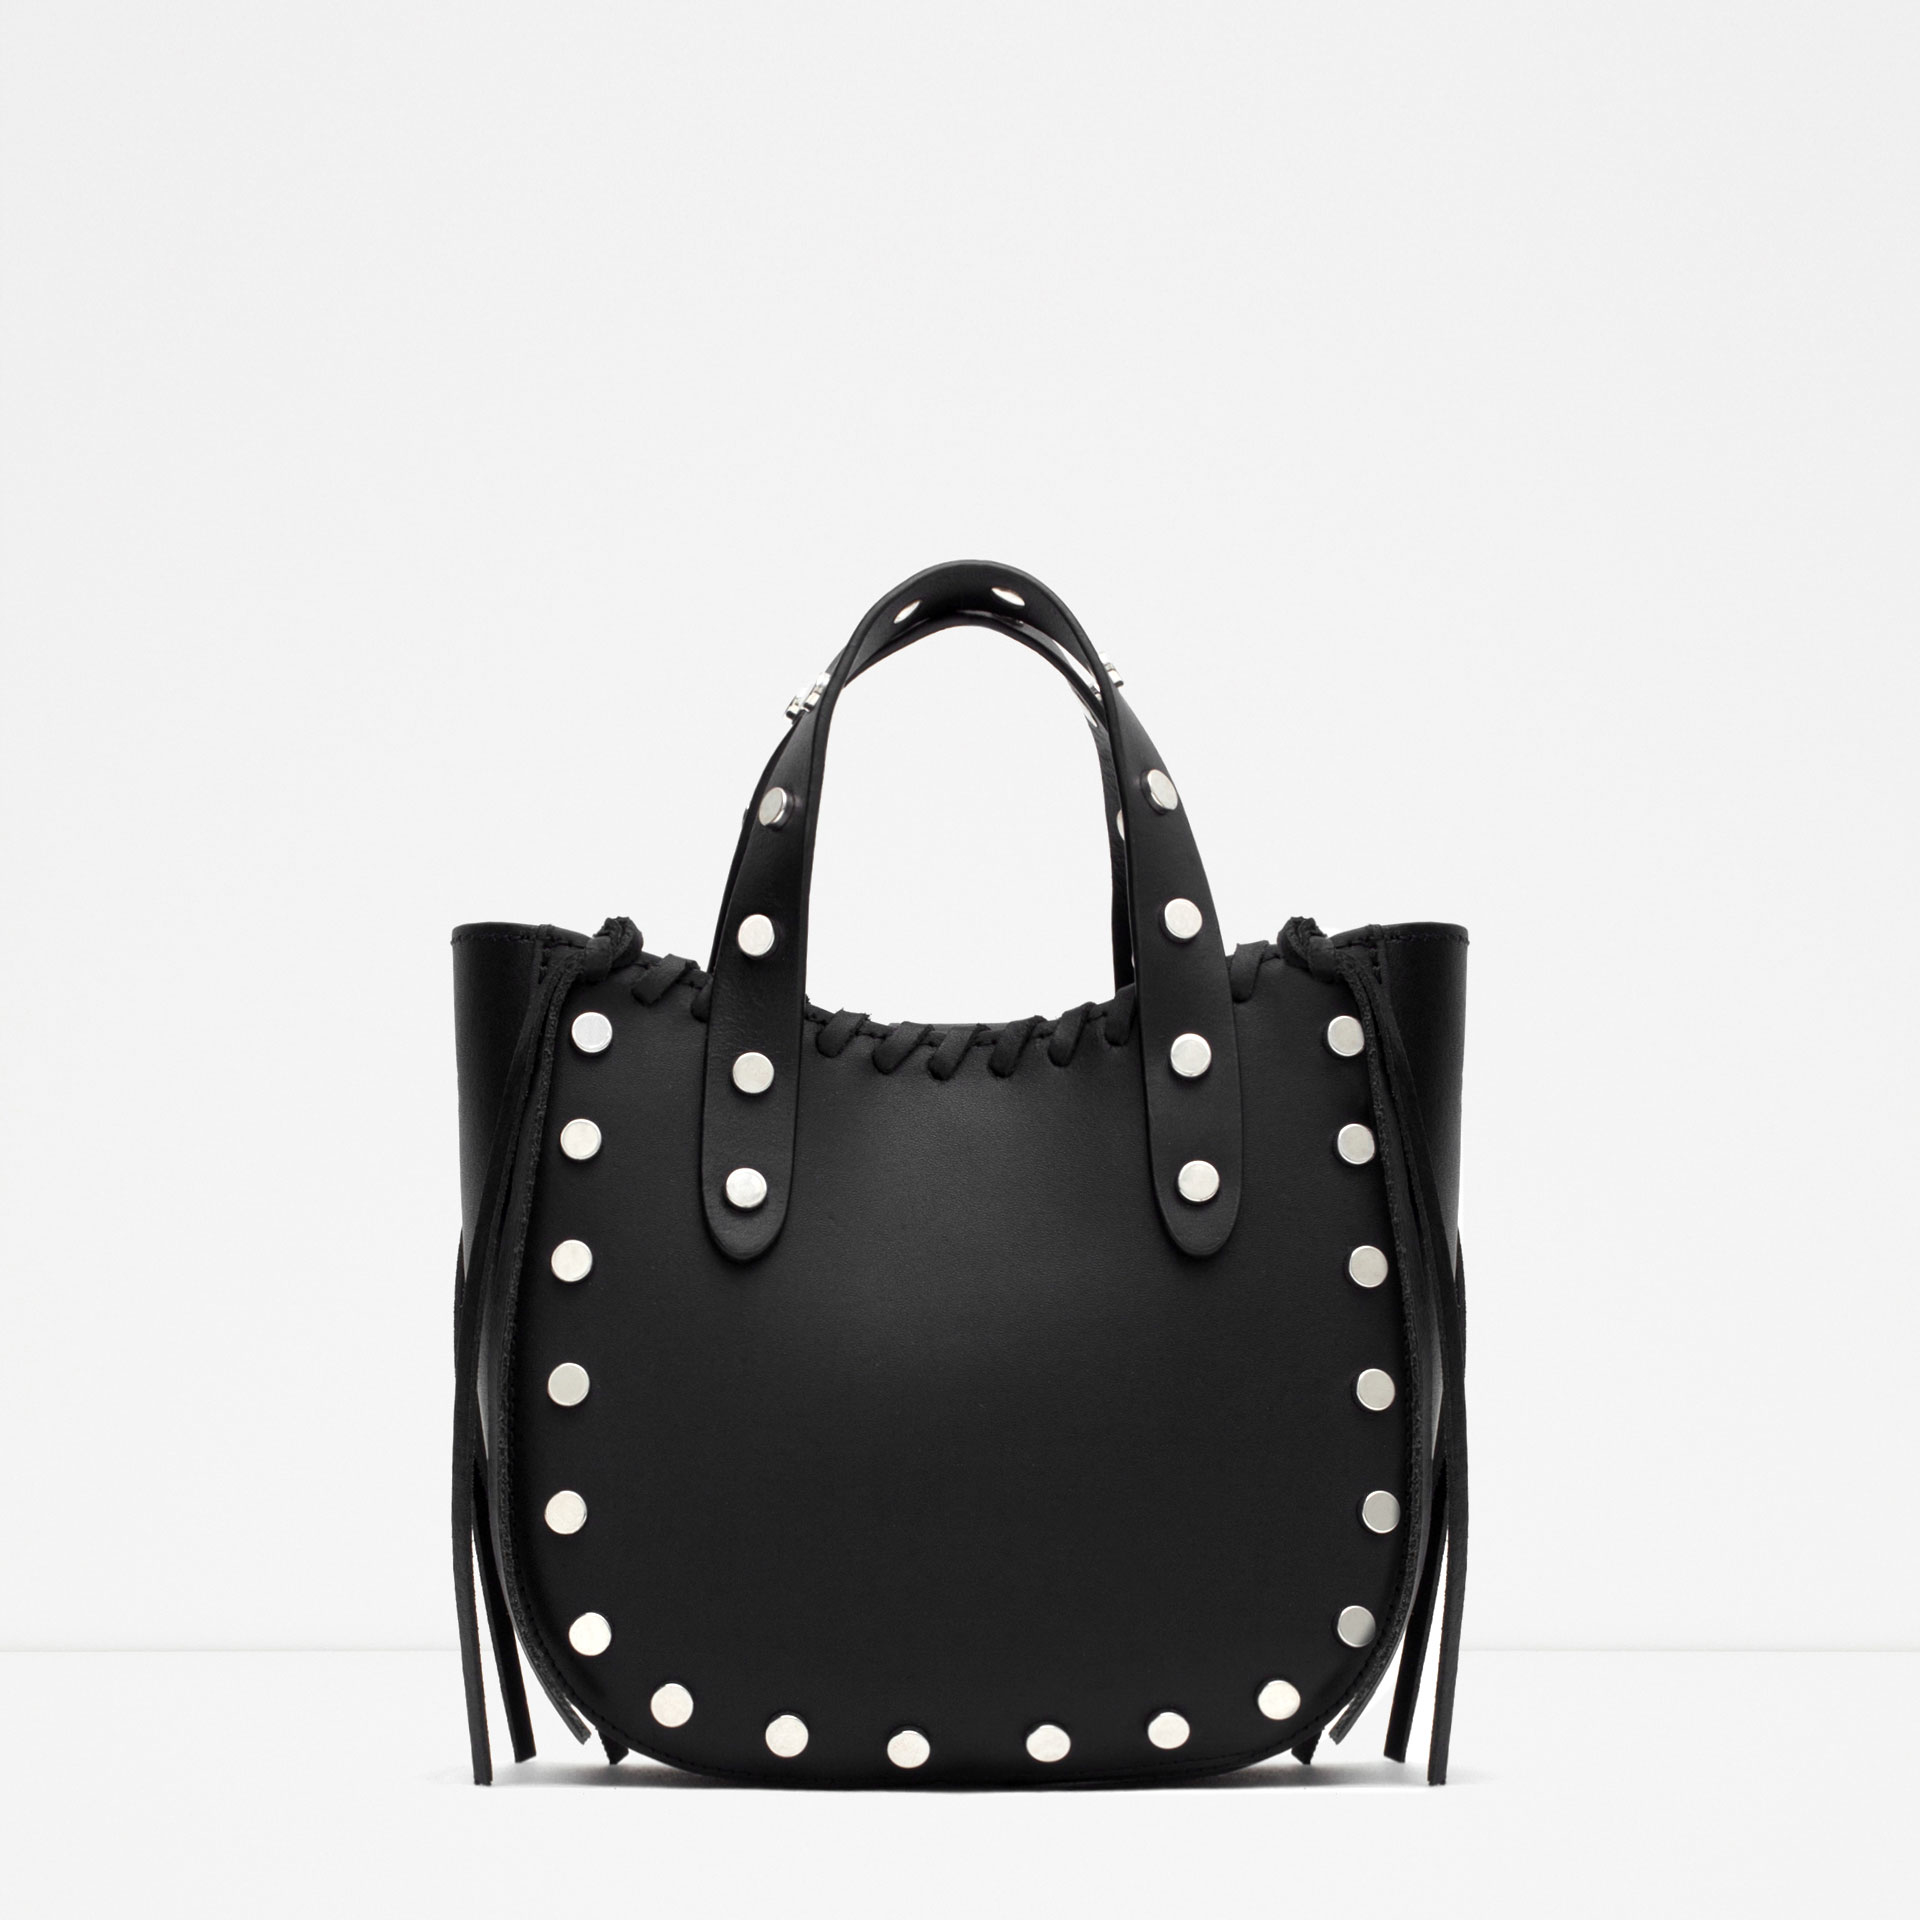 Zara Mini Leather Tote With Studs in Black | Lyst